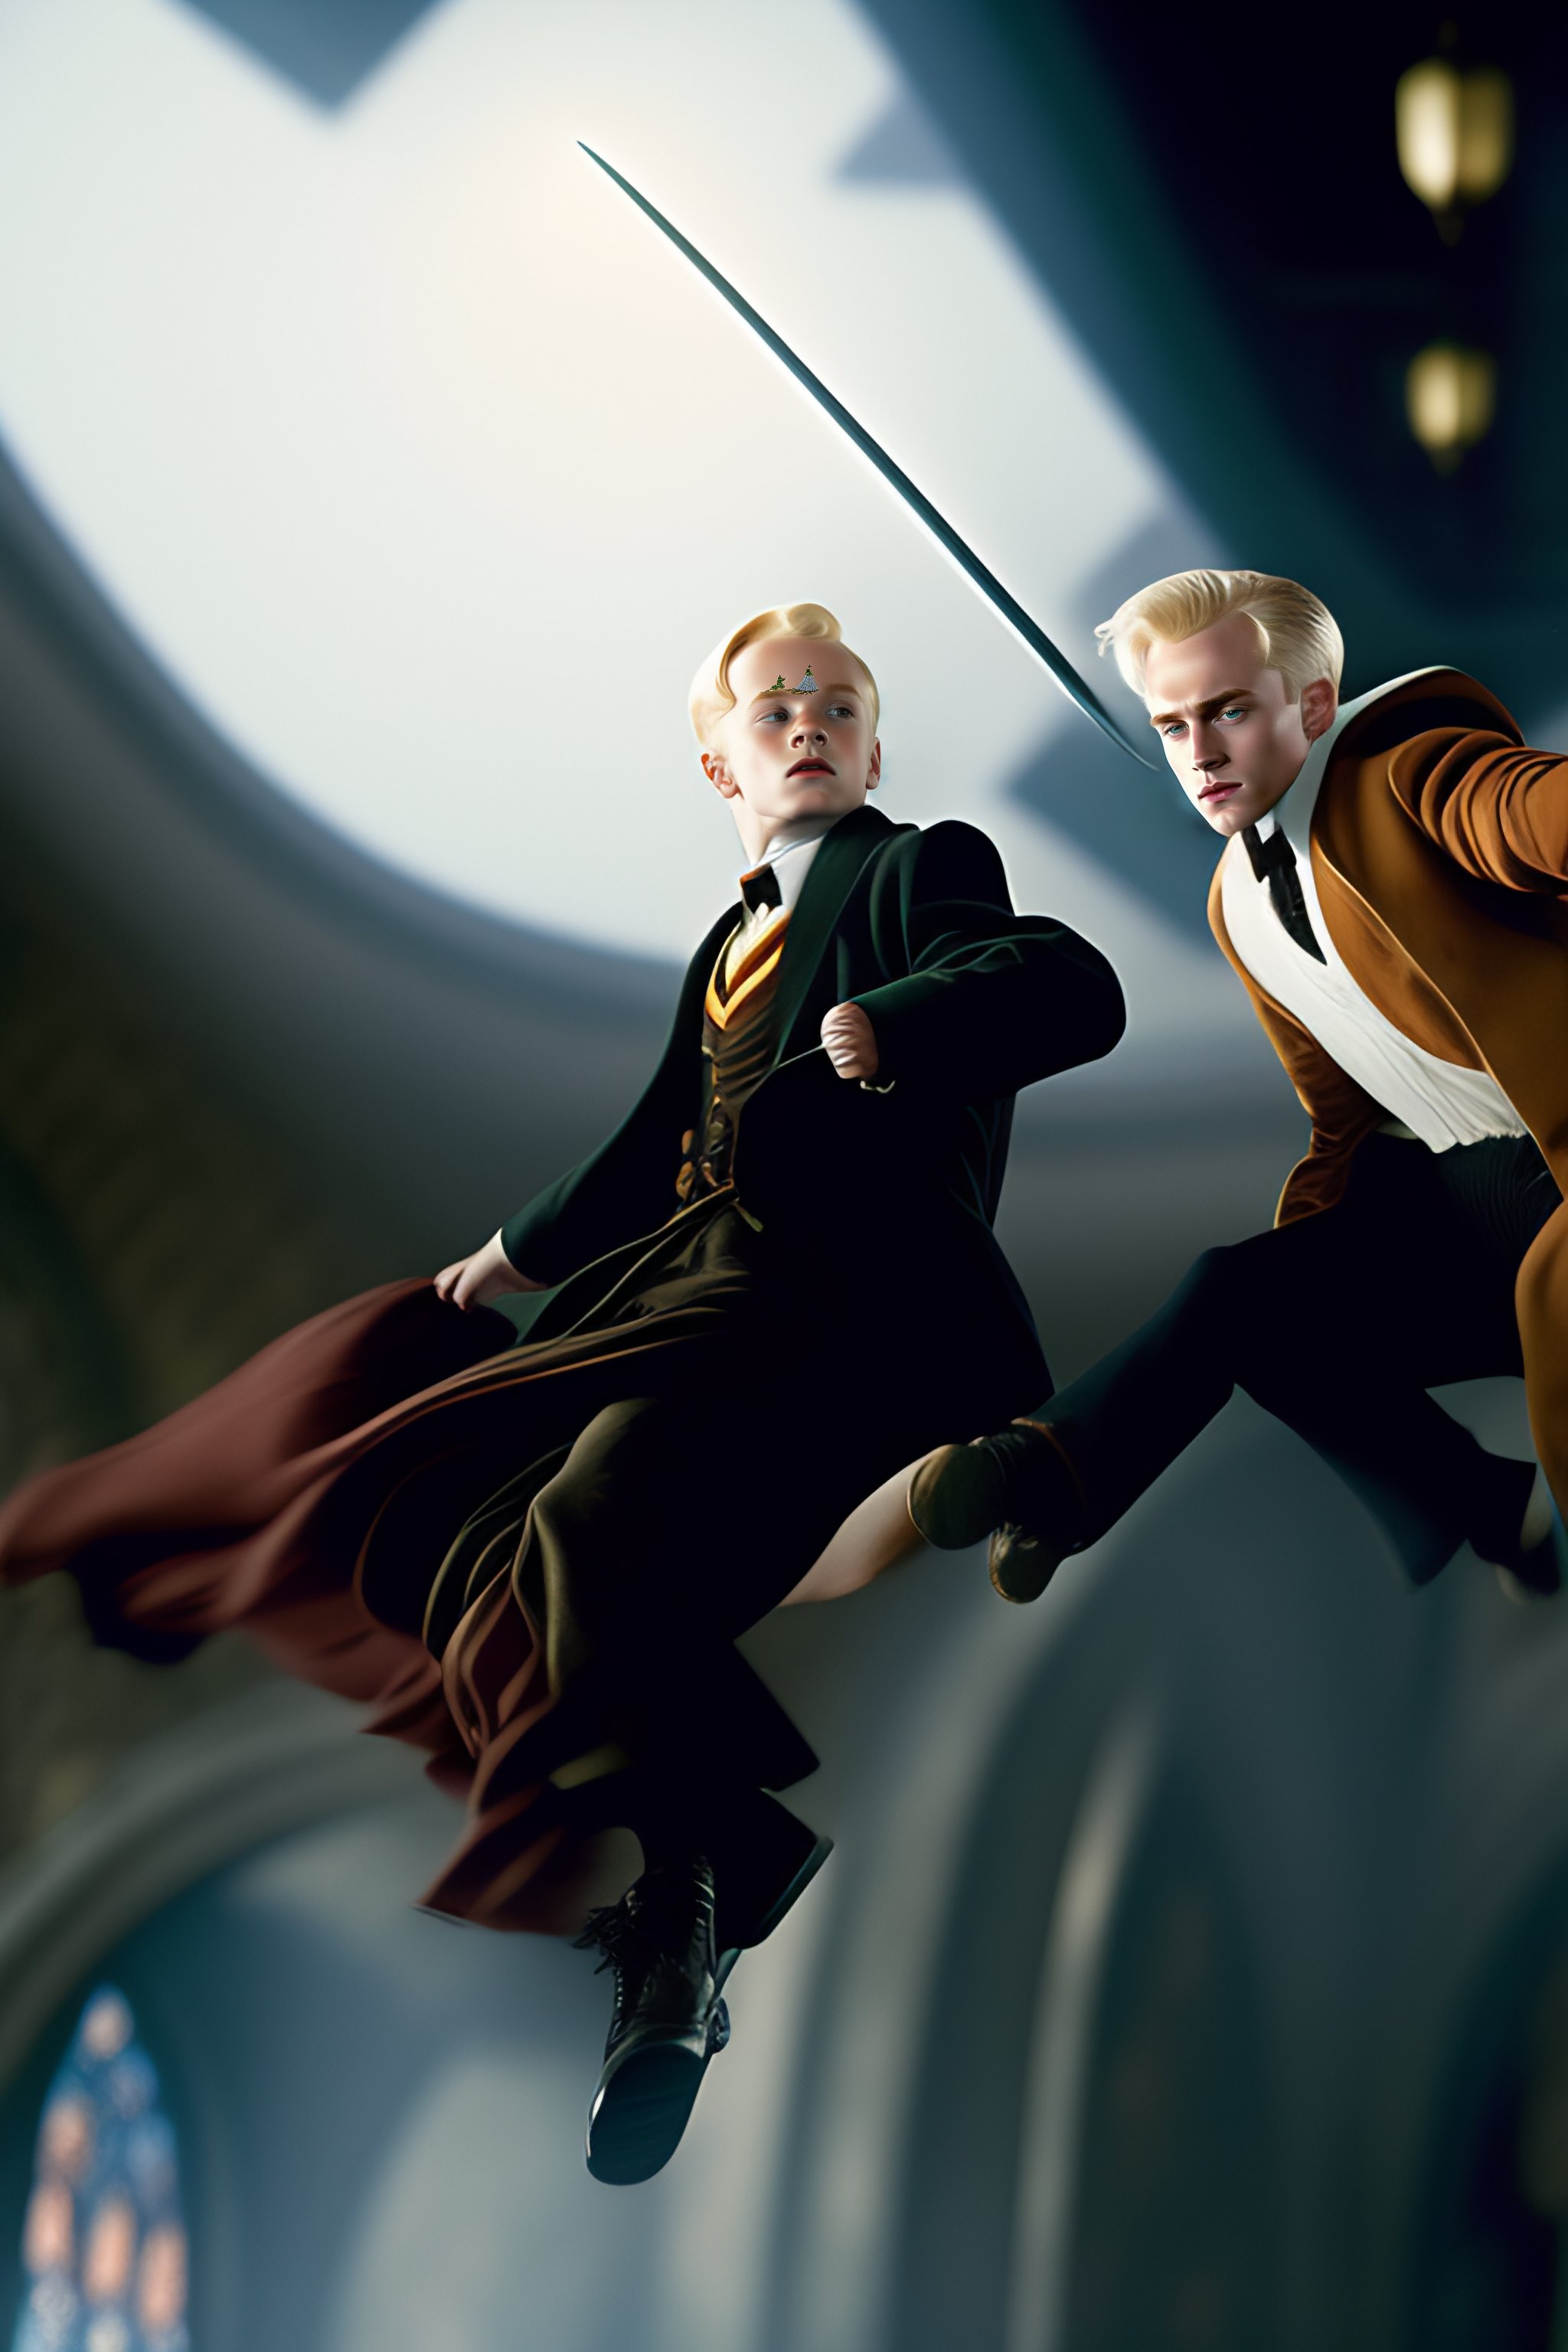 Lexica - Harry Potter and Draco Malfoy flying on a broom in Hogwarts